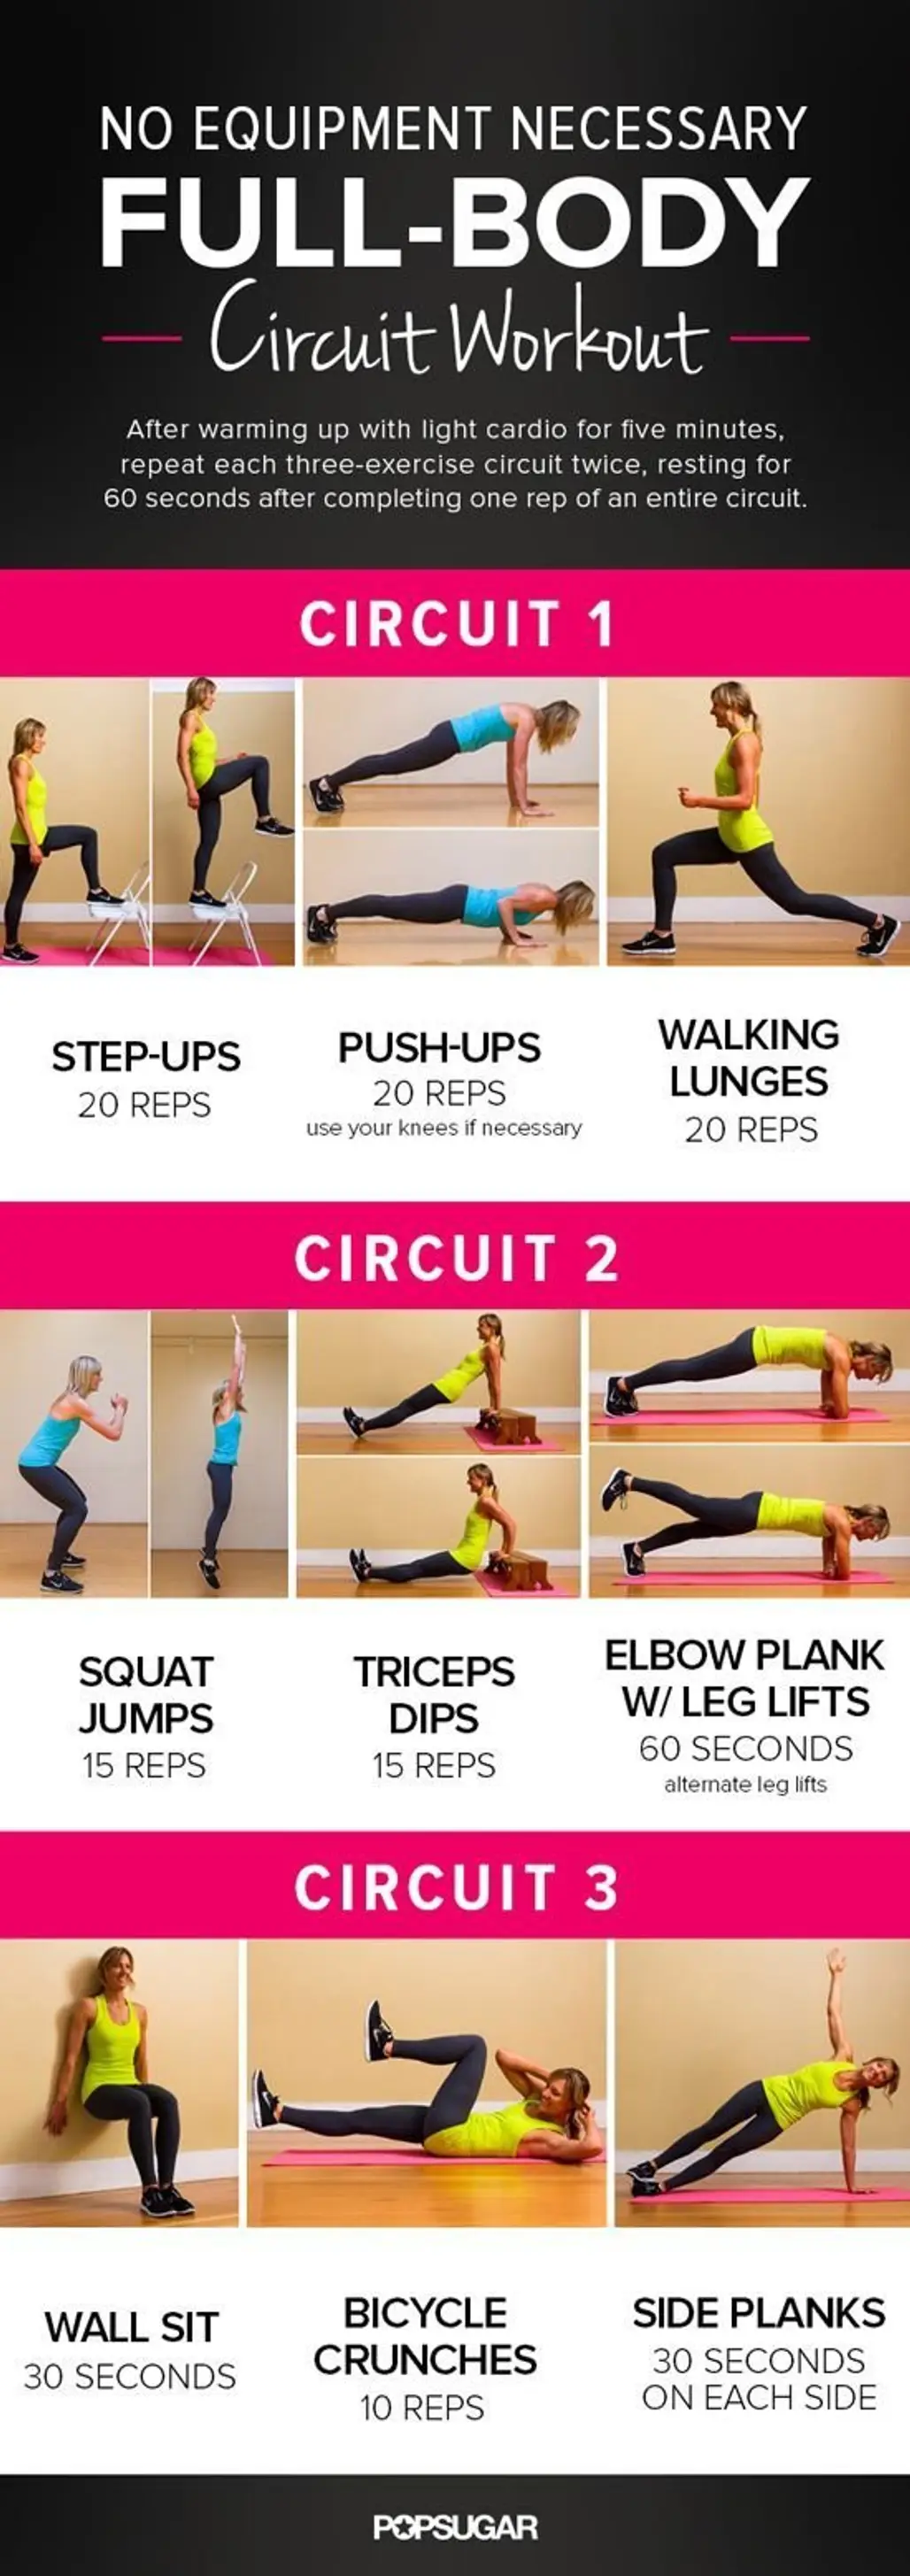 The "No Equipment Necessary" Workout